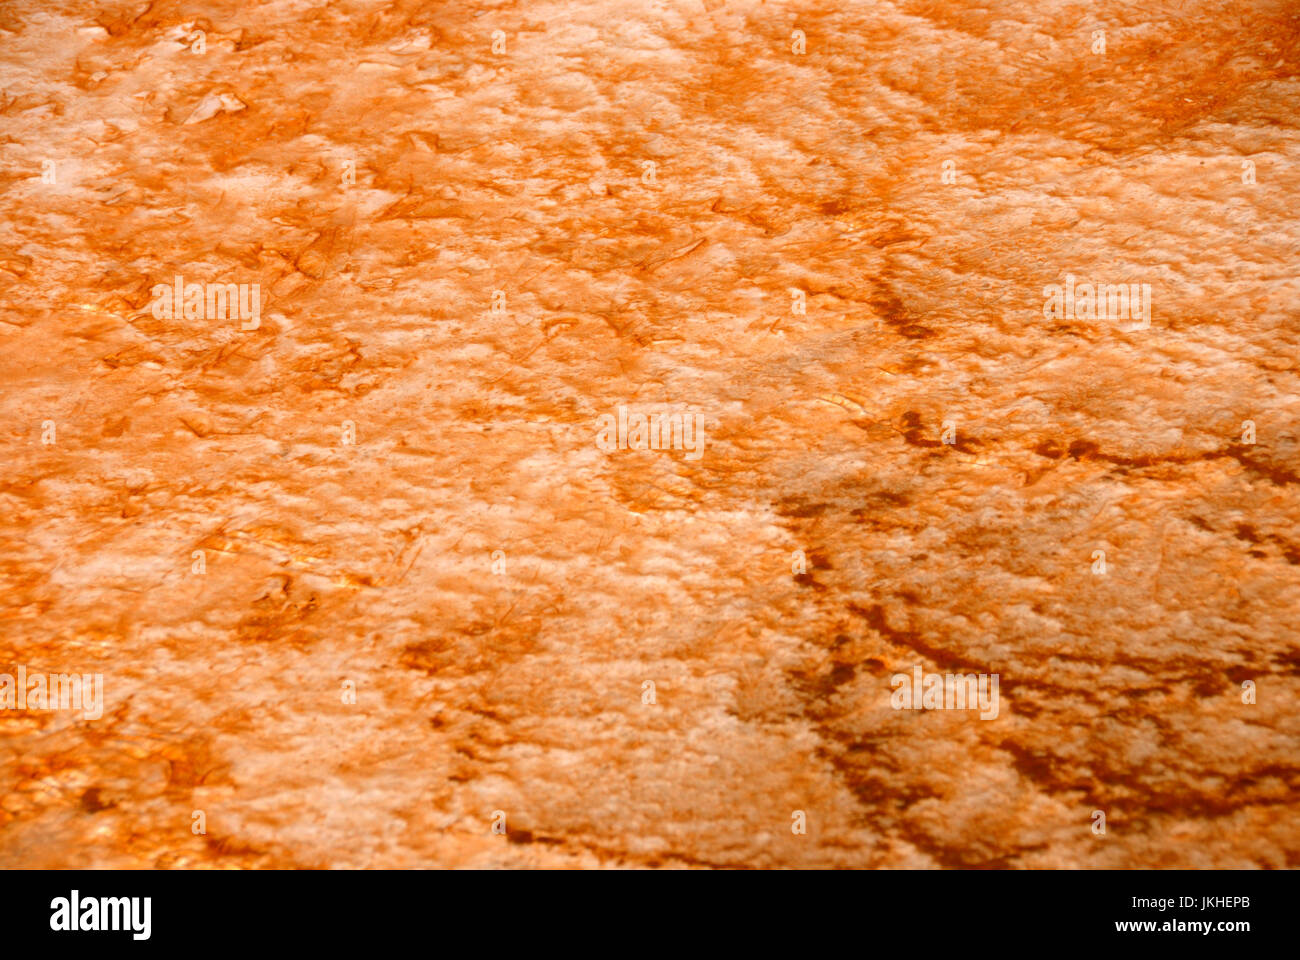 Colorful Bacterial mat, Grand Prismatic Spring, Yellowstone National Park, Wyoming, USA Stock Photo